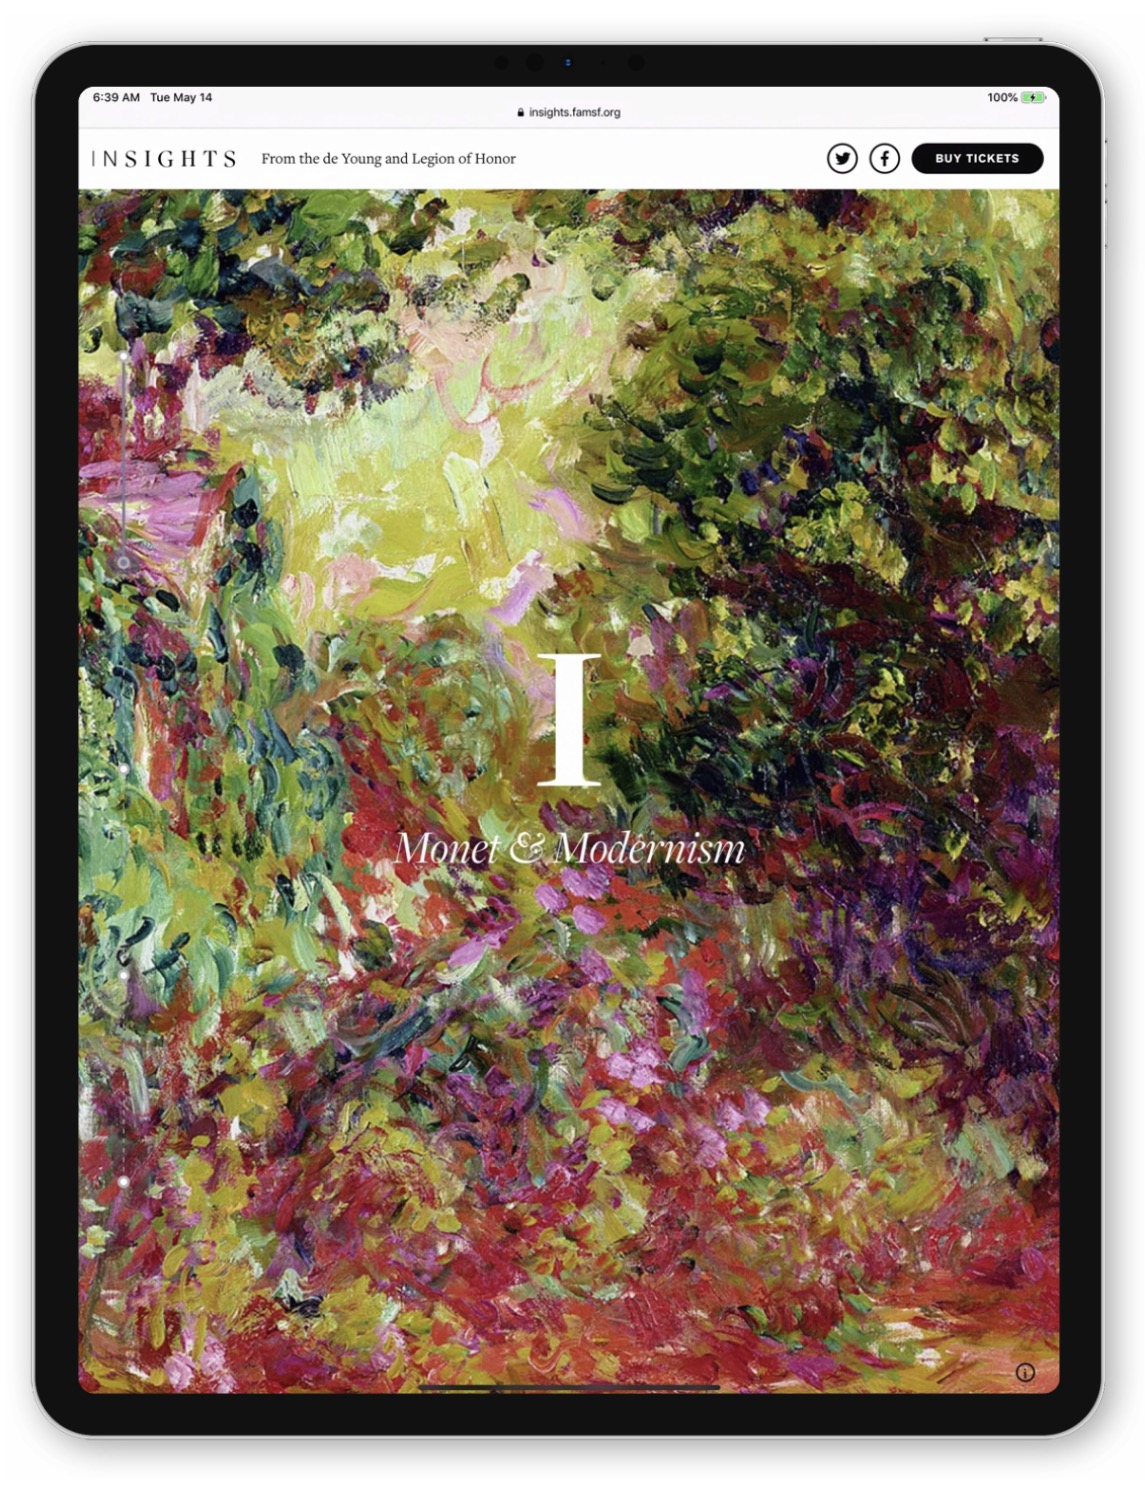 Monet chapter title featuring a detail from “The Artist’s House Seen from the Rose Garden”.